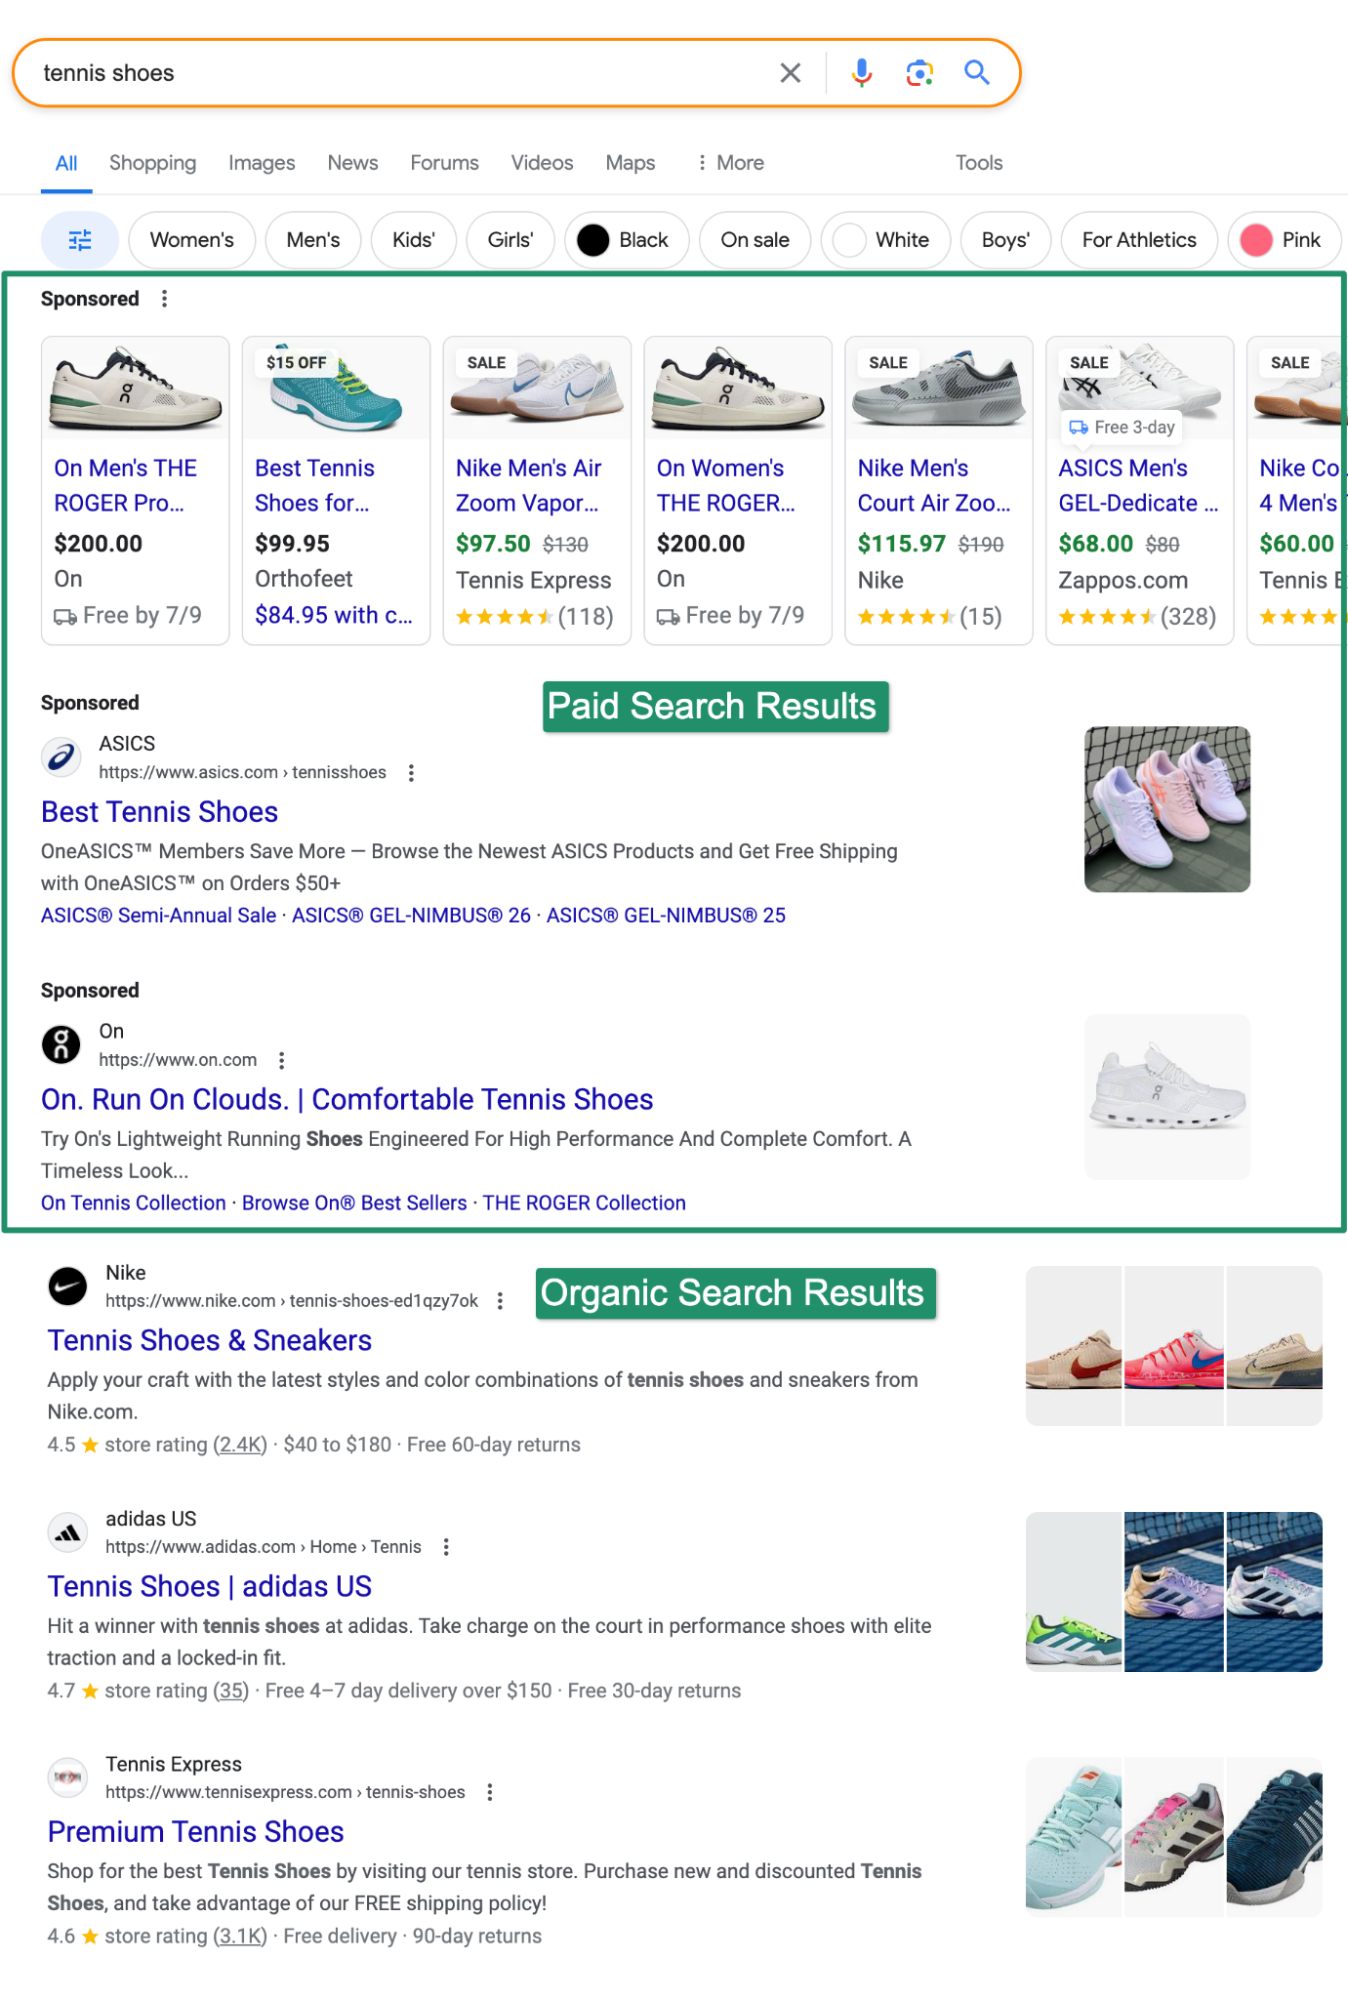 Organic and paid results for tennis shoes on Google search engine results page